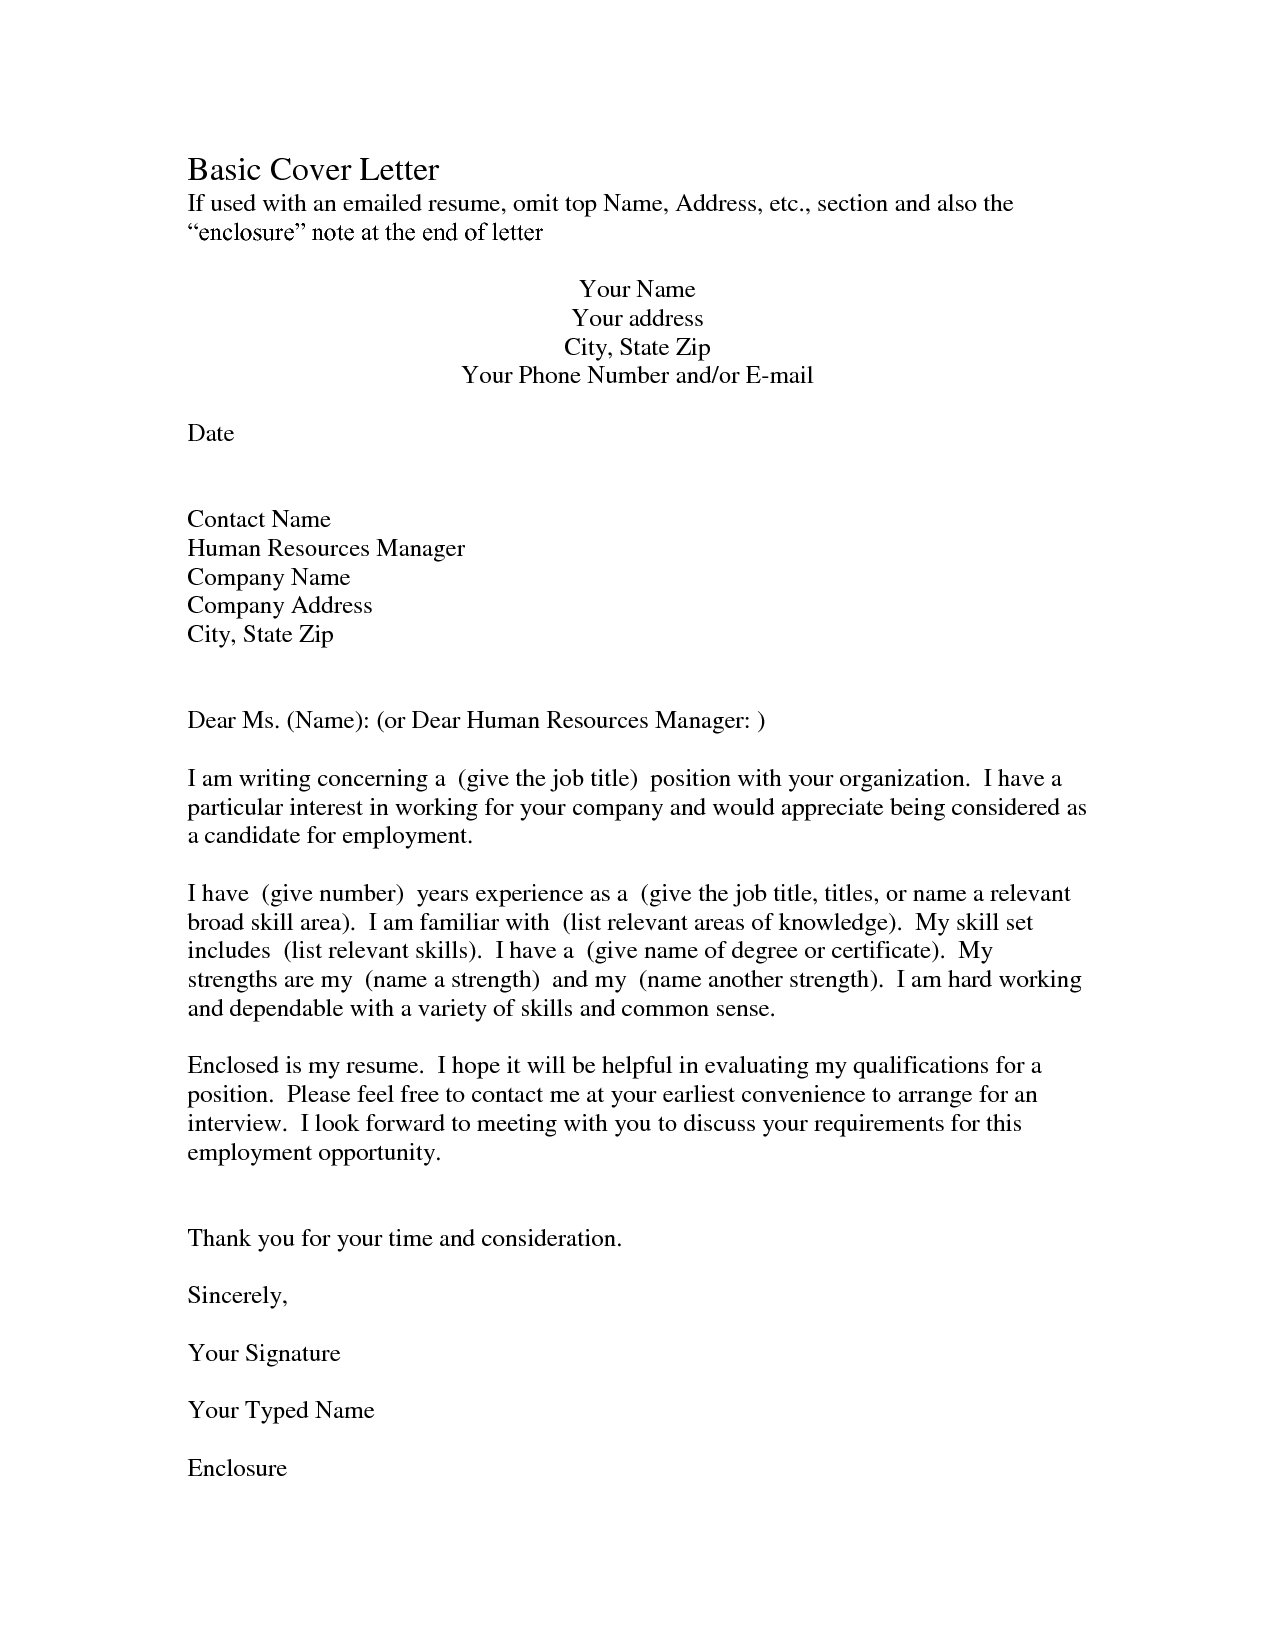 Loss Of Insurance Coverage Letter From Employer Sample Free Demand